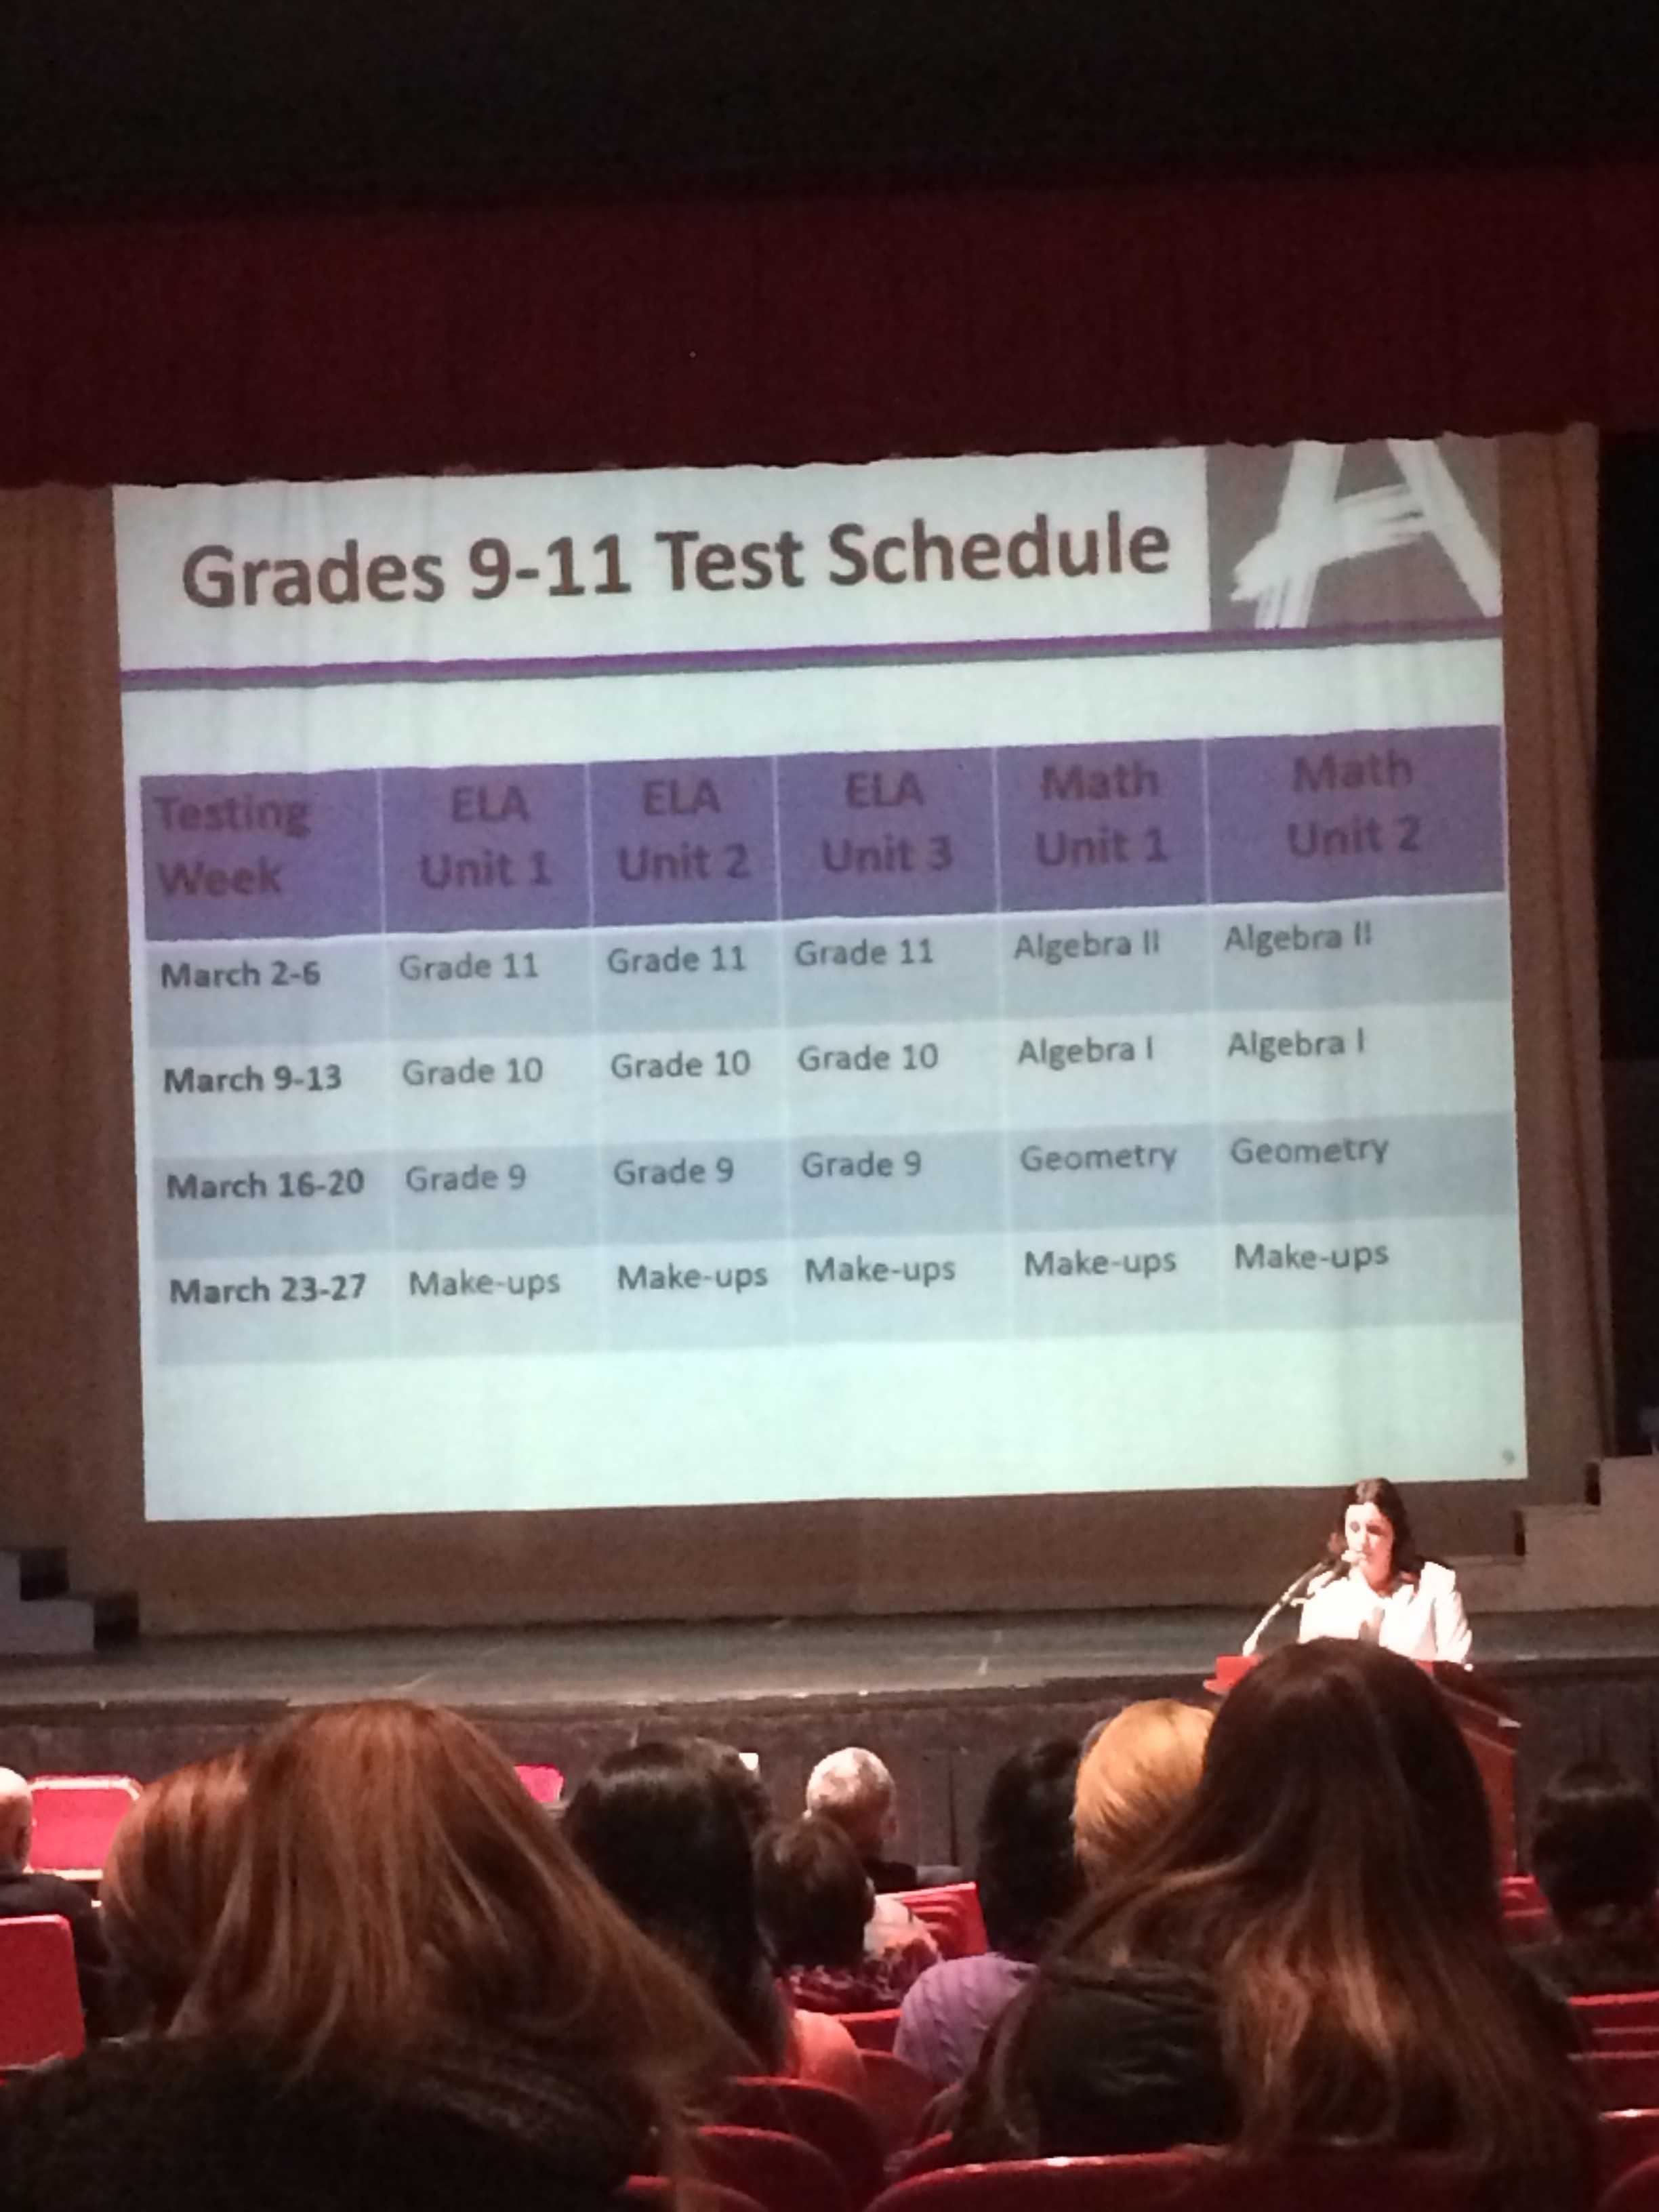 A preview of the PARCC schedule for East students shown at a public meeting at Cherry Hill East.